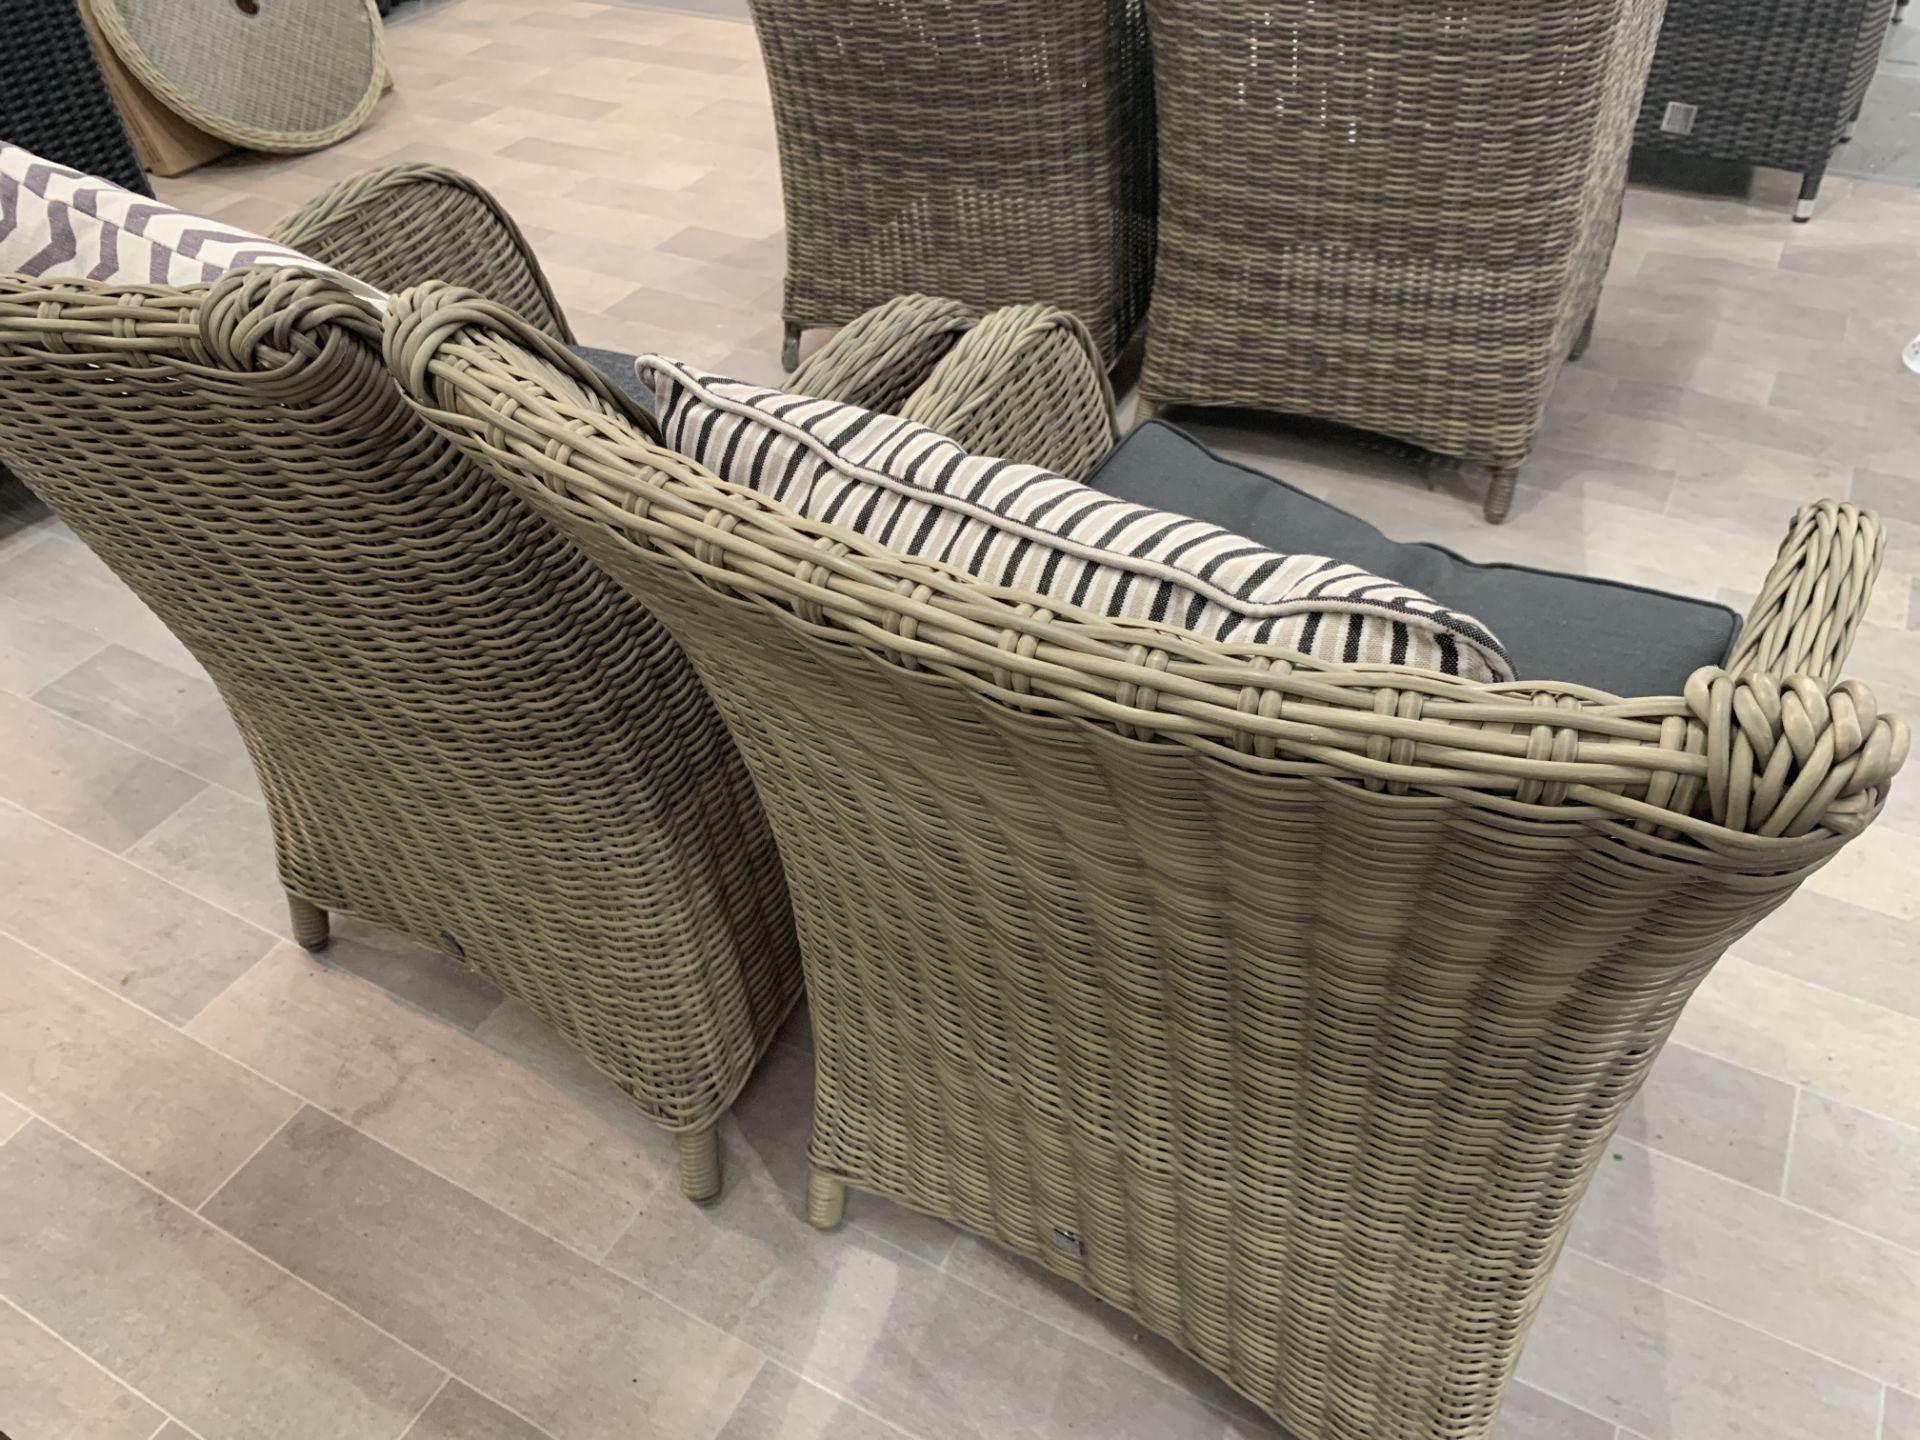 A Pair of woven Maze Rattan arm chairs with cushion seats - Image 3 of 3